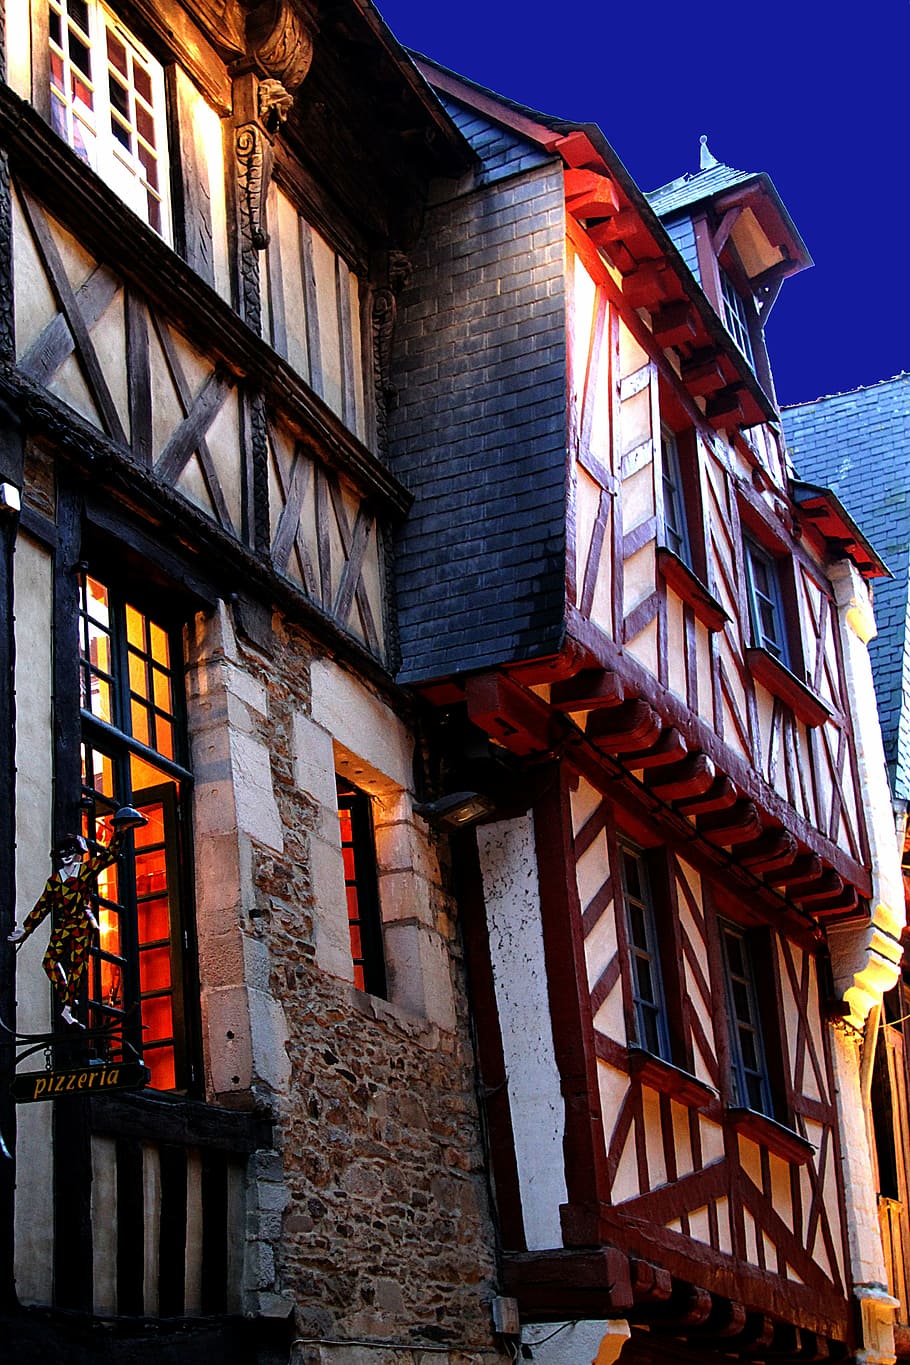 blue hour brittany, vitre, brittany, france, atlantic coast, architecture, house, half-Timbered, window, urban Scene